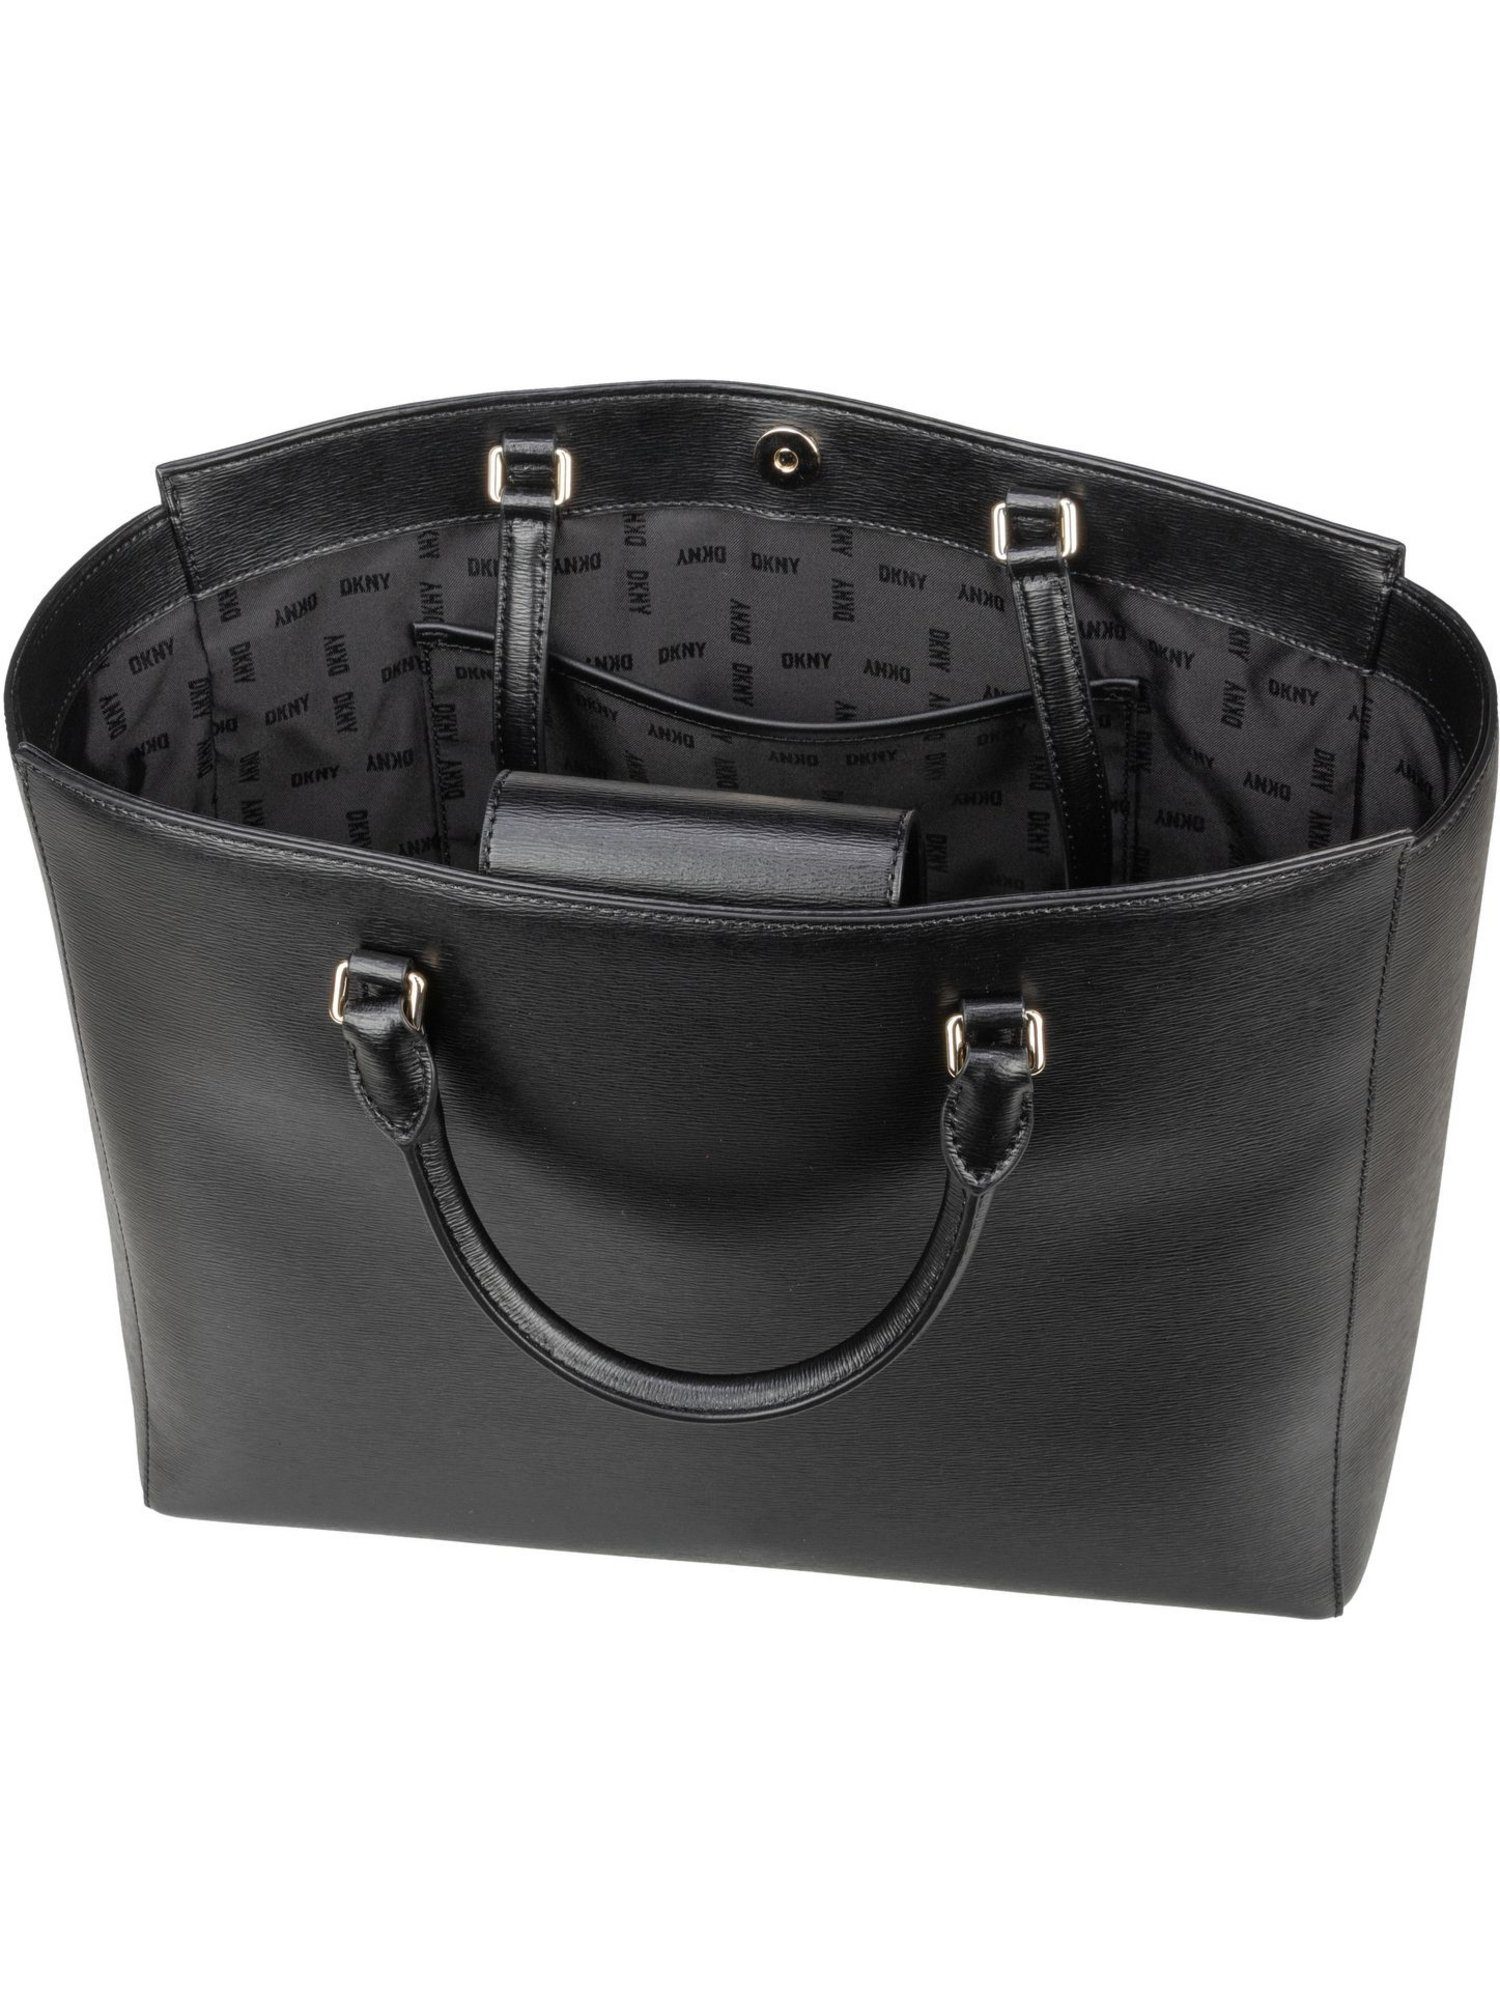 DKNY Shopper Paige Sutton Tote Book Leather